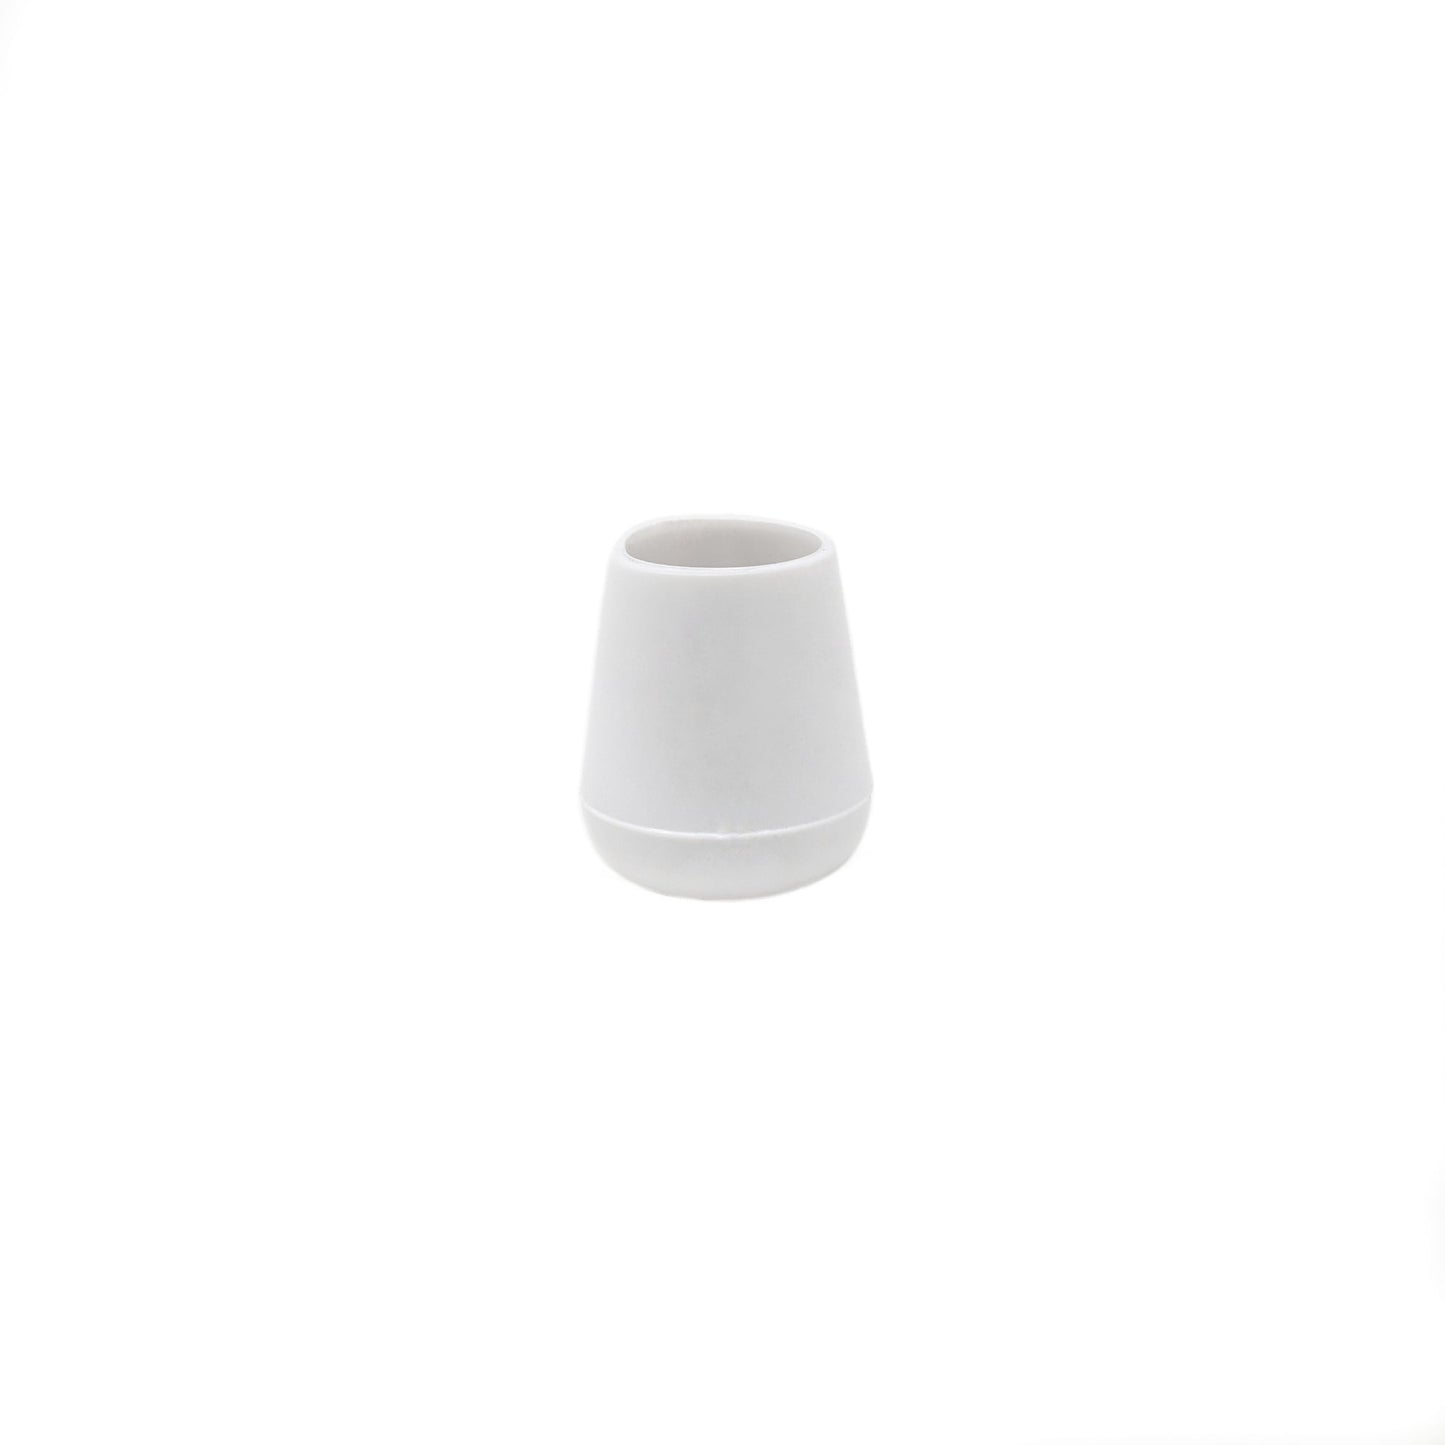 13mm White Rubber Ferrules with Steel Base Insert - Made in Germany - Keay Vital Parts